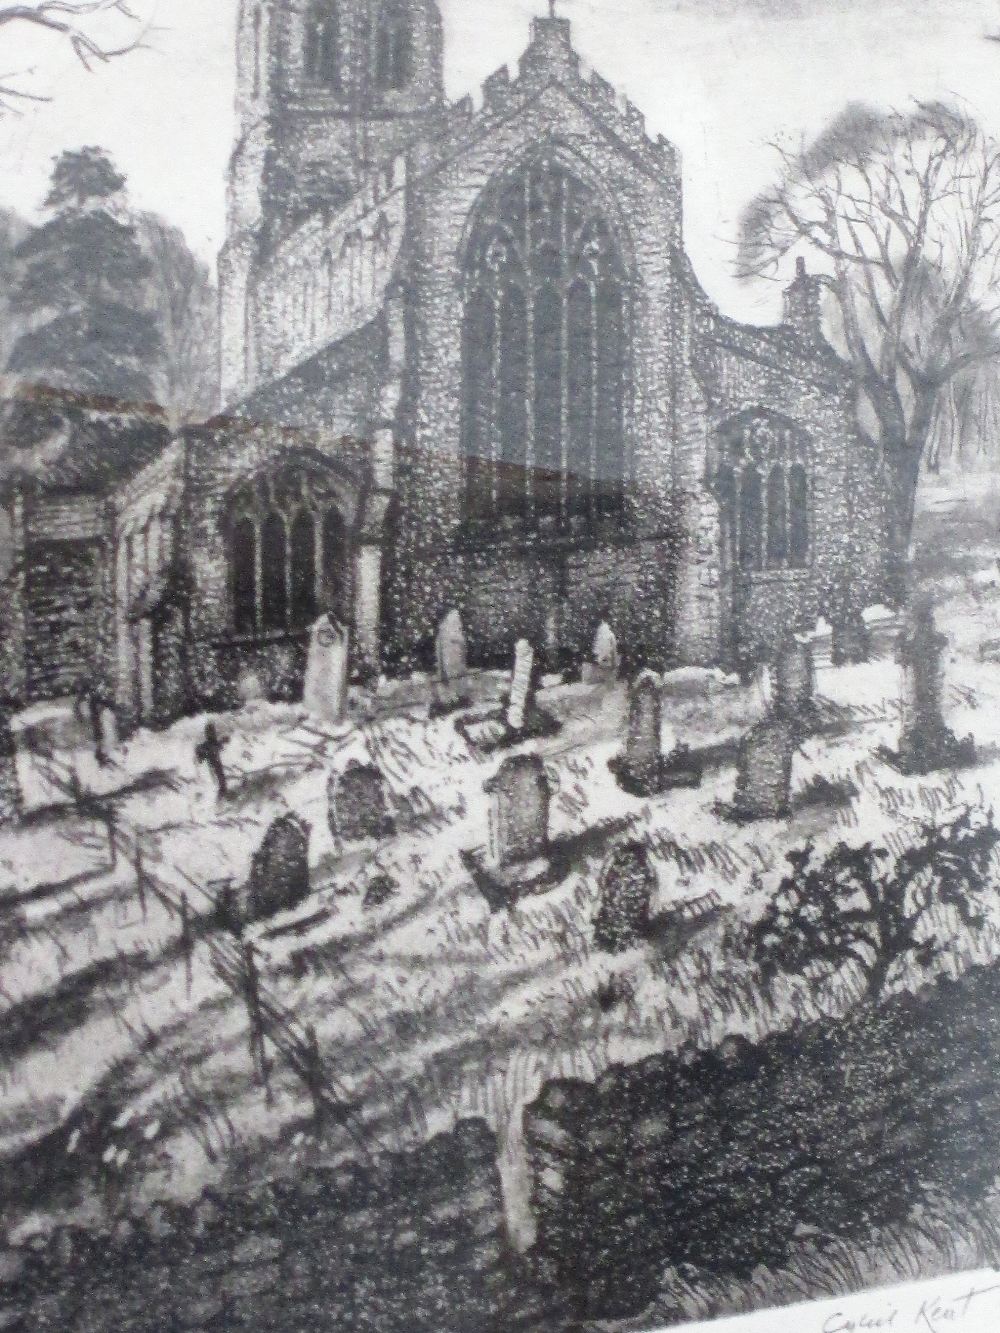 A Limited Edition lithographical print, after Cyril Kent, St Andrews Church Aysgarth